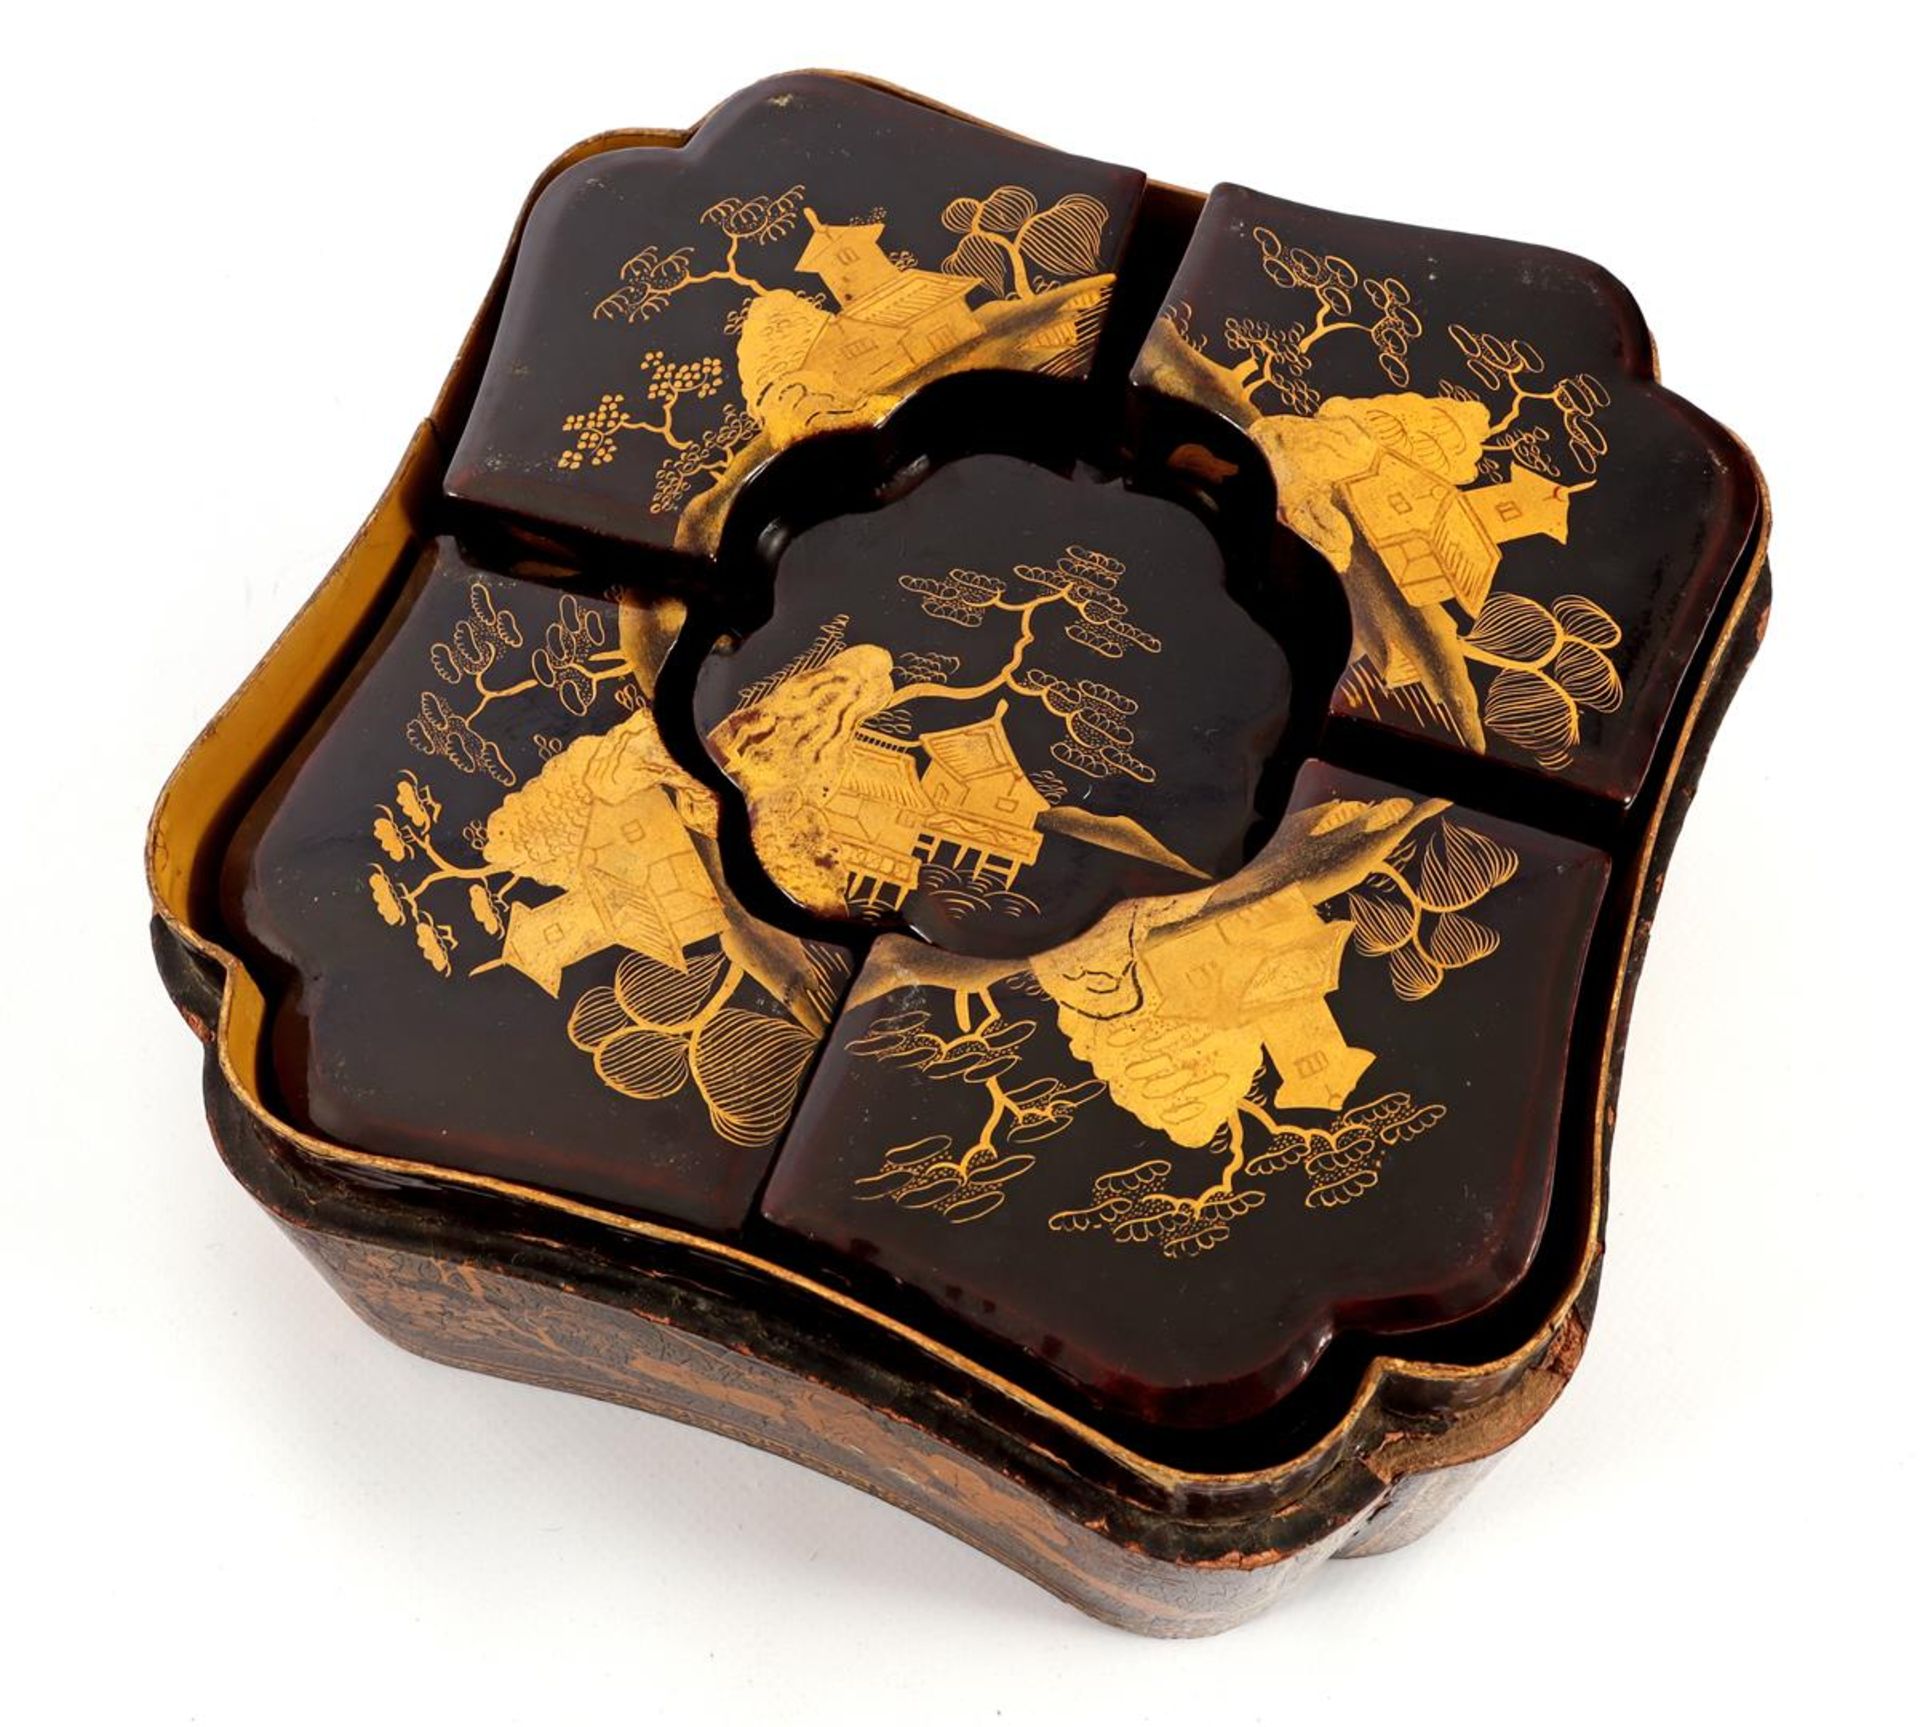 Chinese lacquer box with decoration in gold leaf - Image 3 of 4